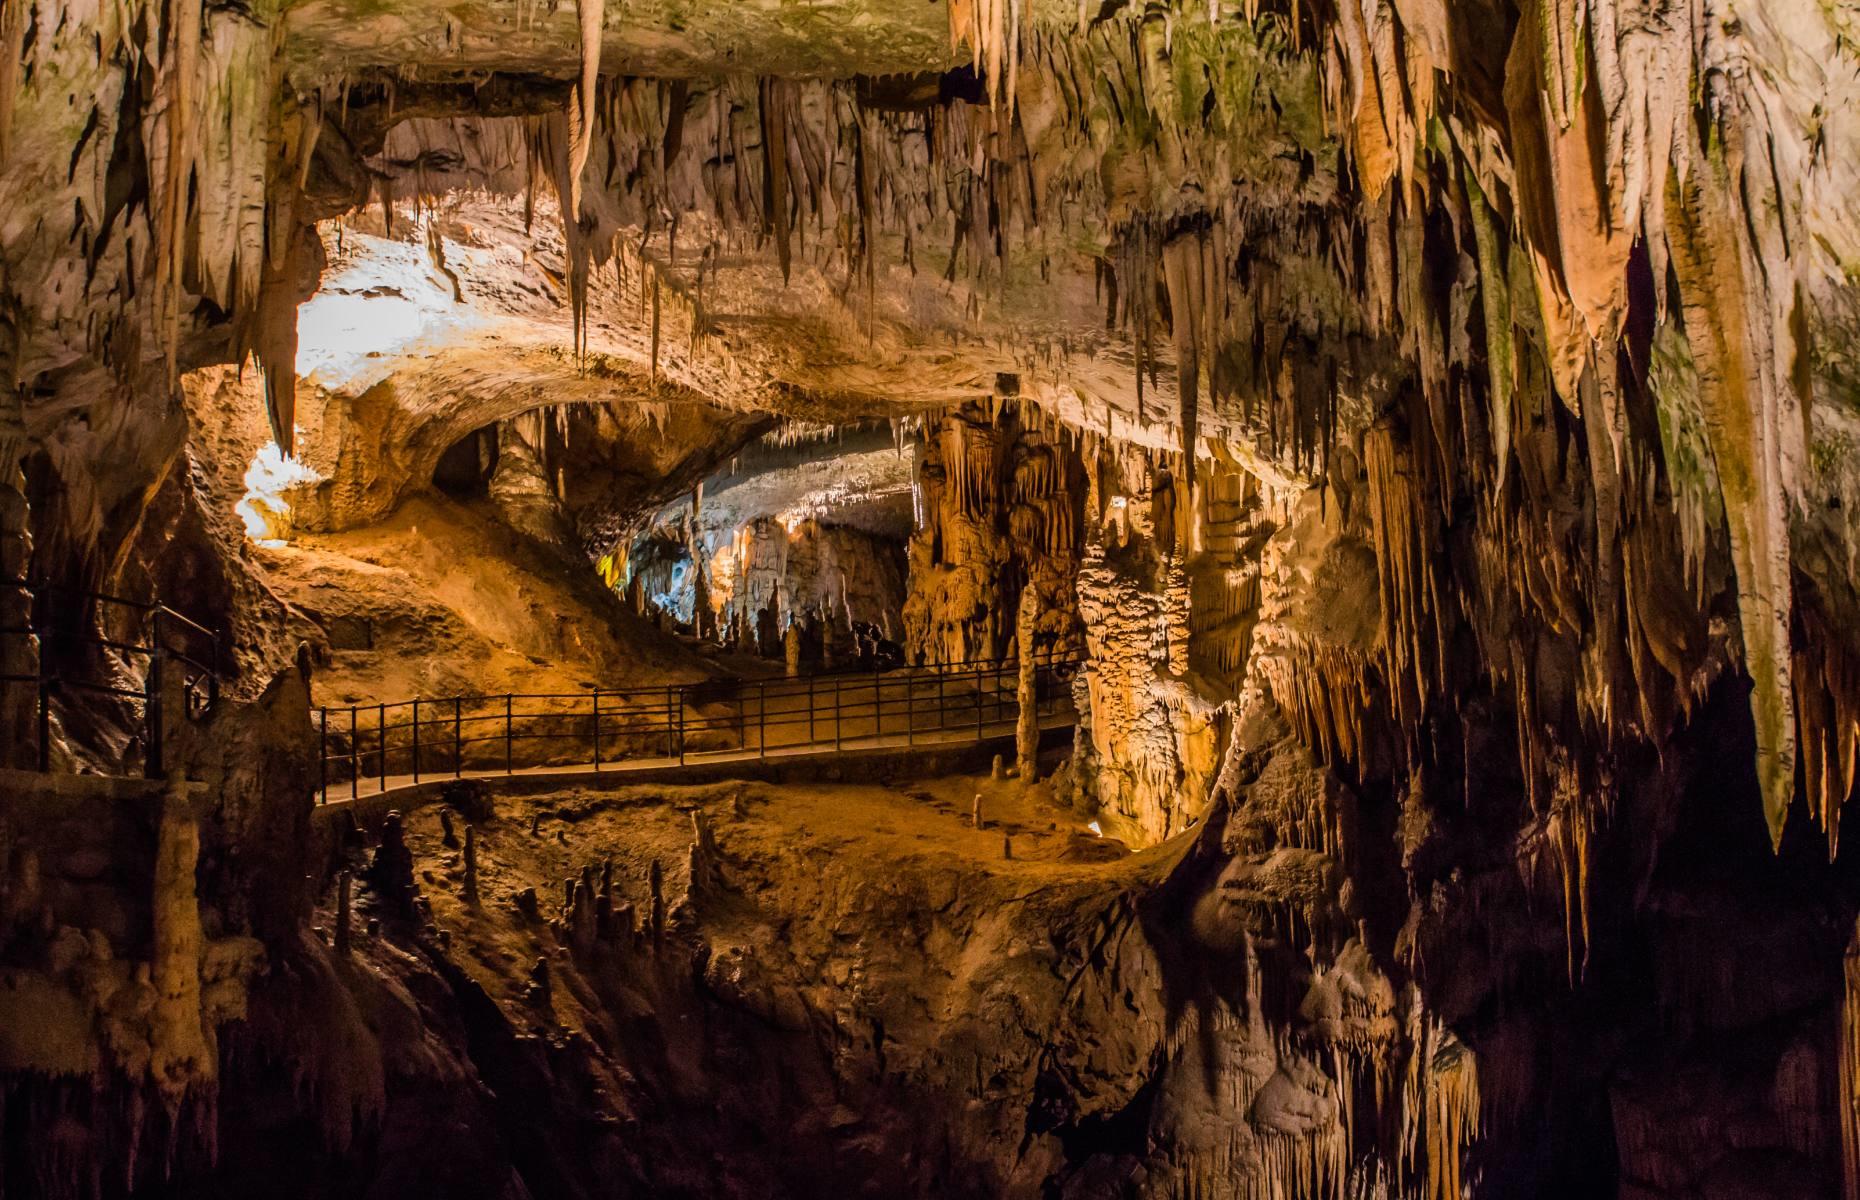 <p>Postojna Caves is Slovenia’s largest cave system, which spans over 12 miles (19km), with a quarter of that open to the public. You can walk the route, but there’s also a miniature train (opened in 1872) for a relaxing exploration of 2.2 miles (3.7km). Look out for the creepy, almost translucent olms, or “baby dragons", in the exhibition aquarium.</p>  <p><strong><a href="https://www.loveexploring.com/gallerylist/64460/12-reasons-to-love-slovenia">See more reasons to love Slovenia</a></strong></p>